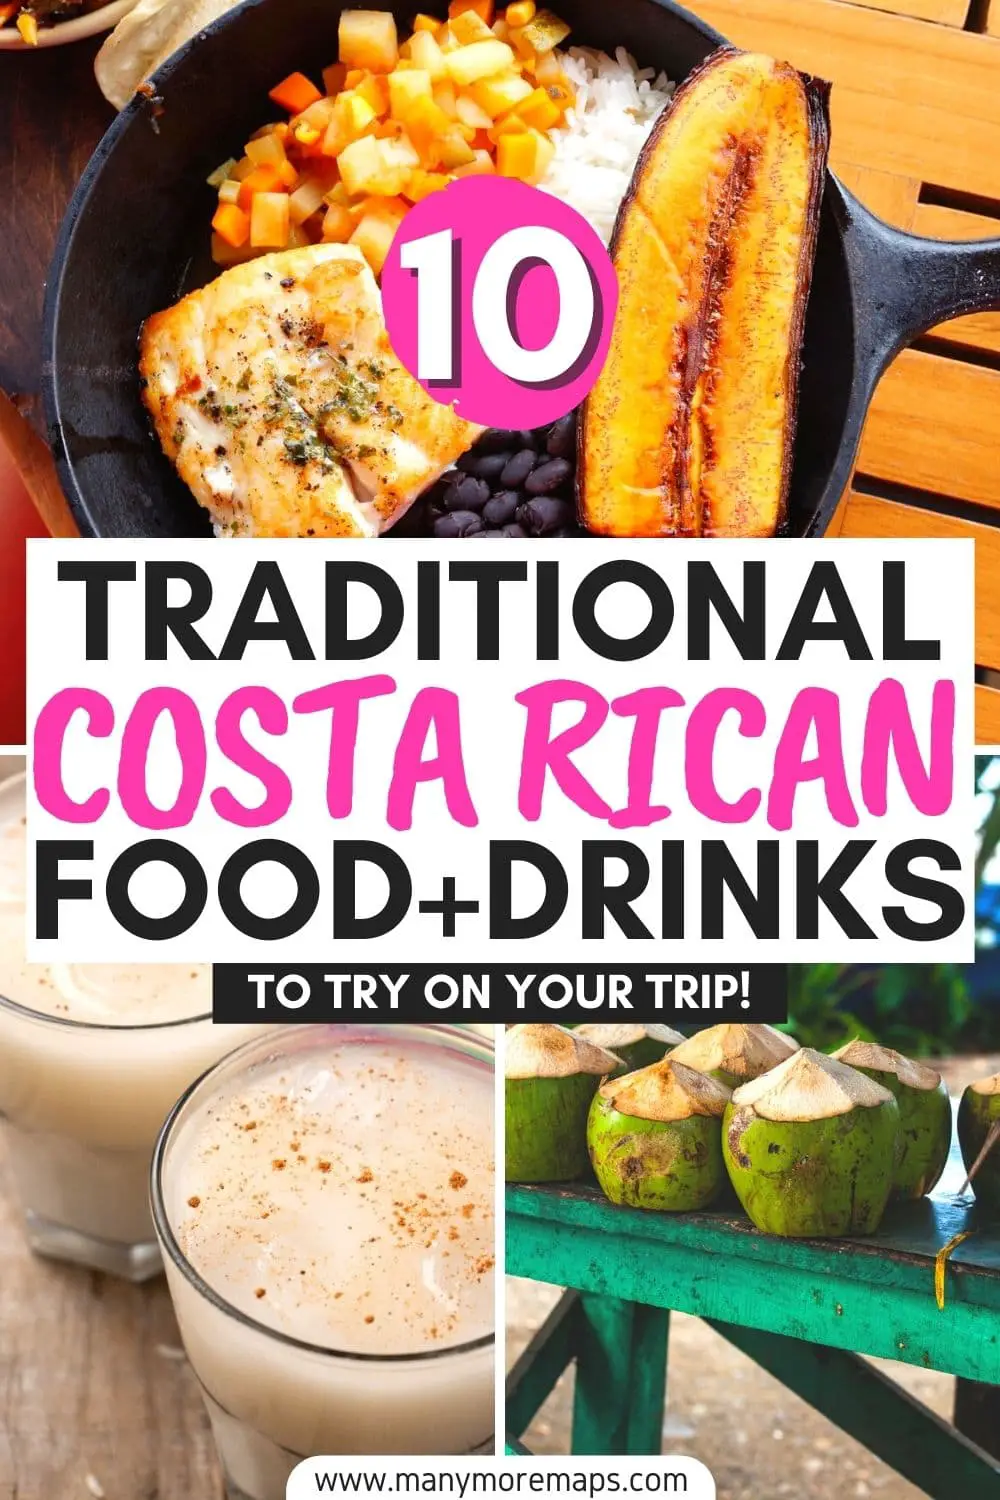 Looking for traditional and authentic food and drinks to try in Costa Rica? Check out my roundup of the best Costa Rican dishes, including casado, gallo pinto, breakfast options, horchata, rice and beans and more! Costa rica trave tips vegetarian recipes for Costa Rican food, where to eat in Costa Rica, famous foods in Costa Rica.